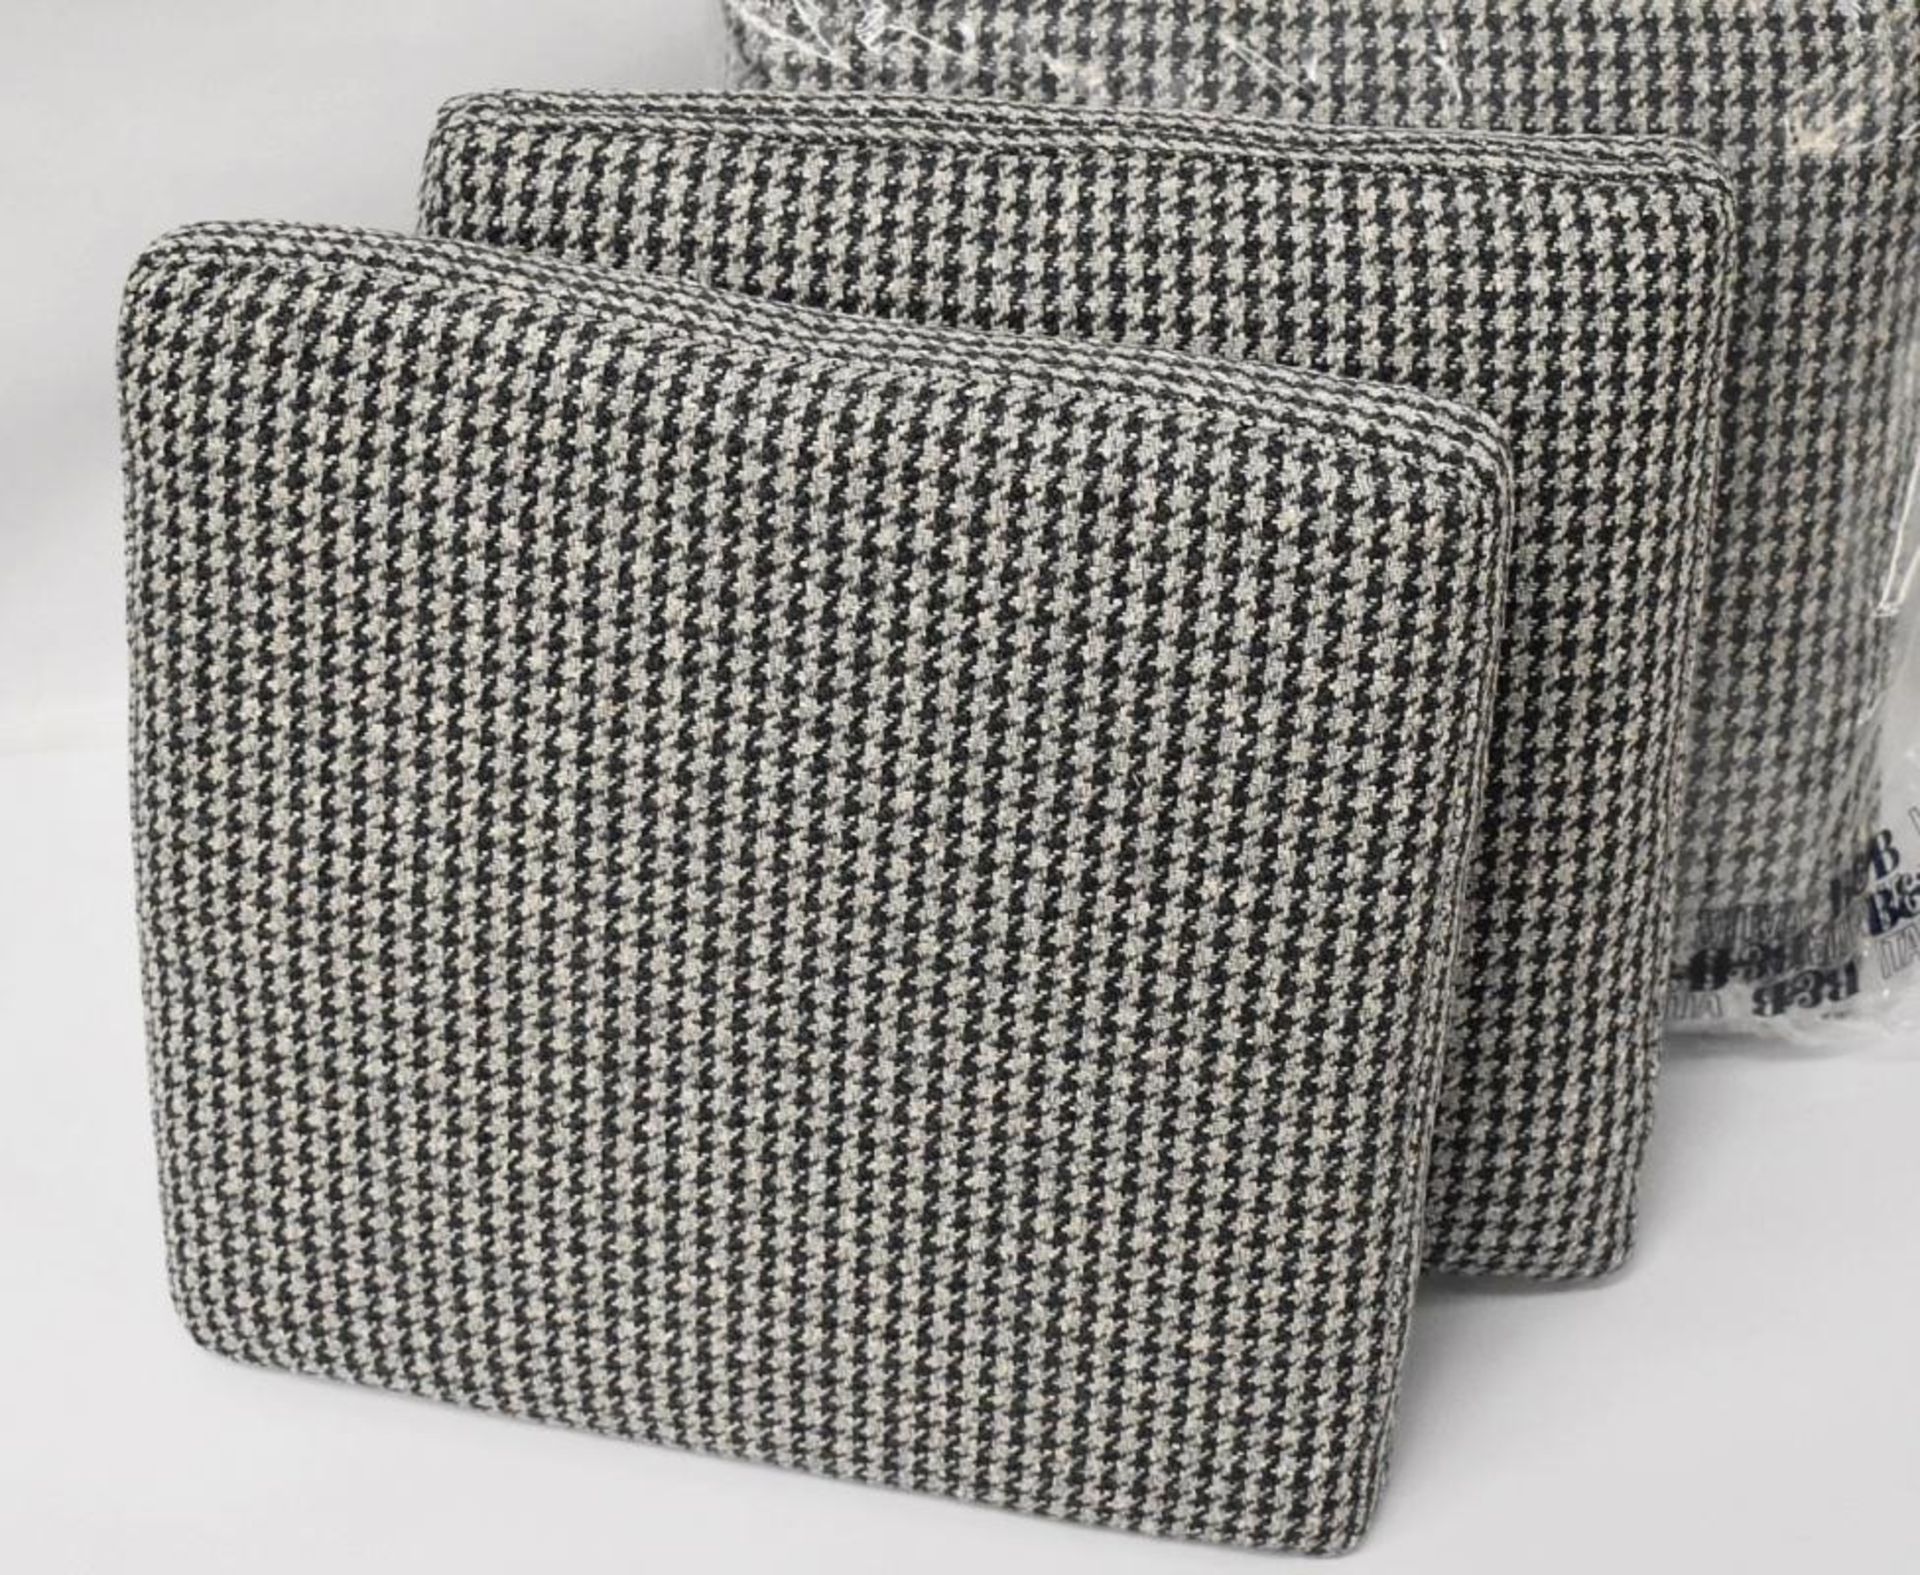 4 x B&B ITALIA 'Andy 13' Sofa Back Cushions In A Premium Woven Houndstooth Fabric - Ref: 5089331/A/P